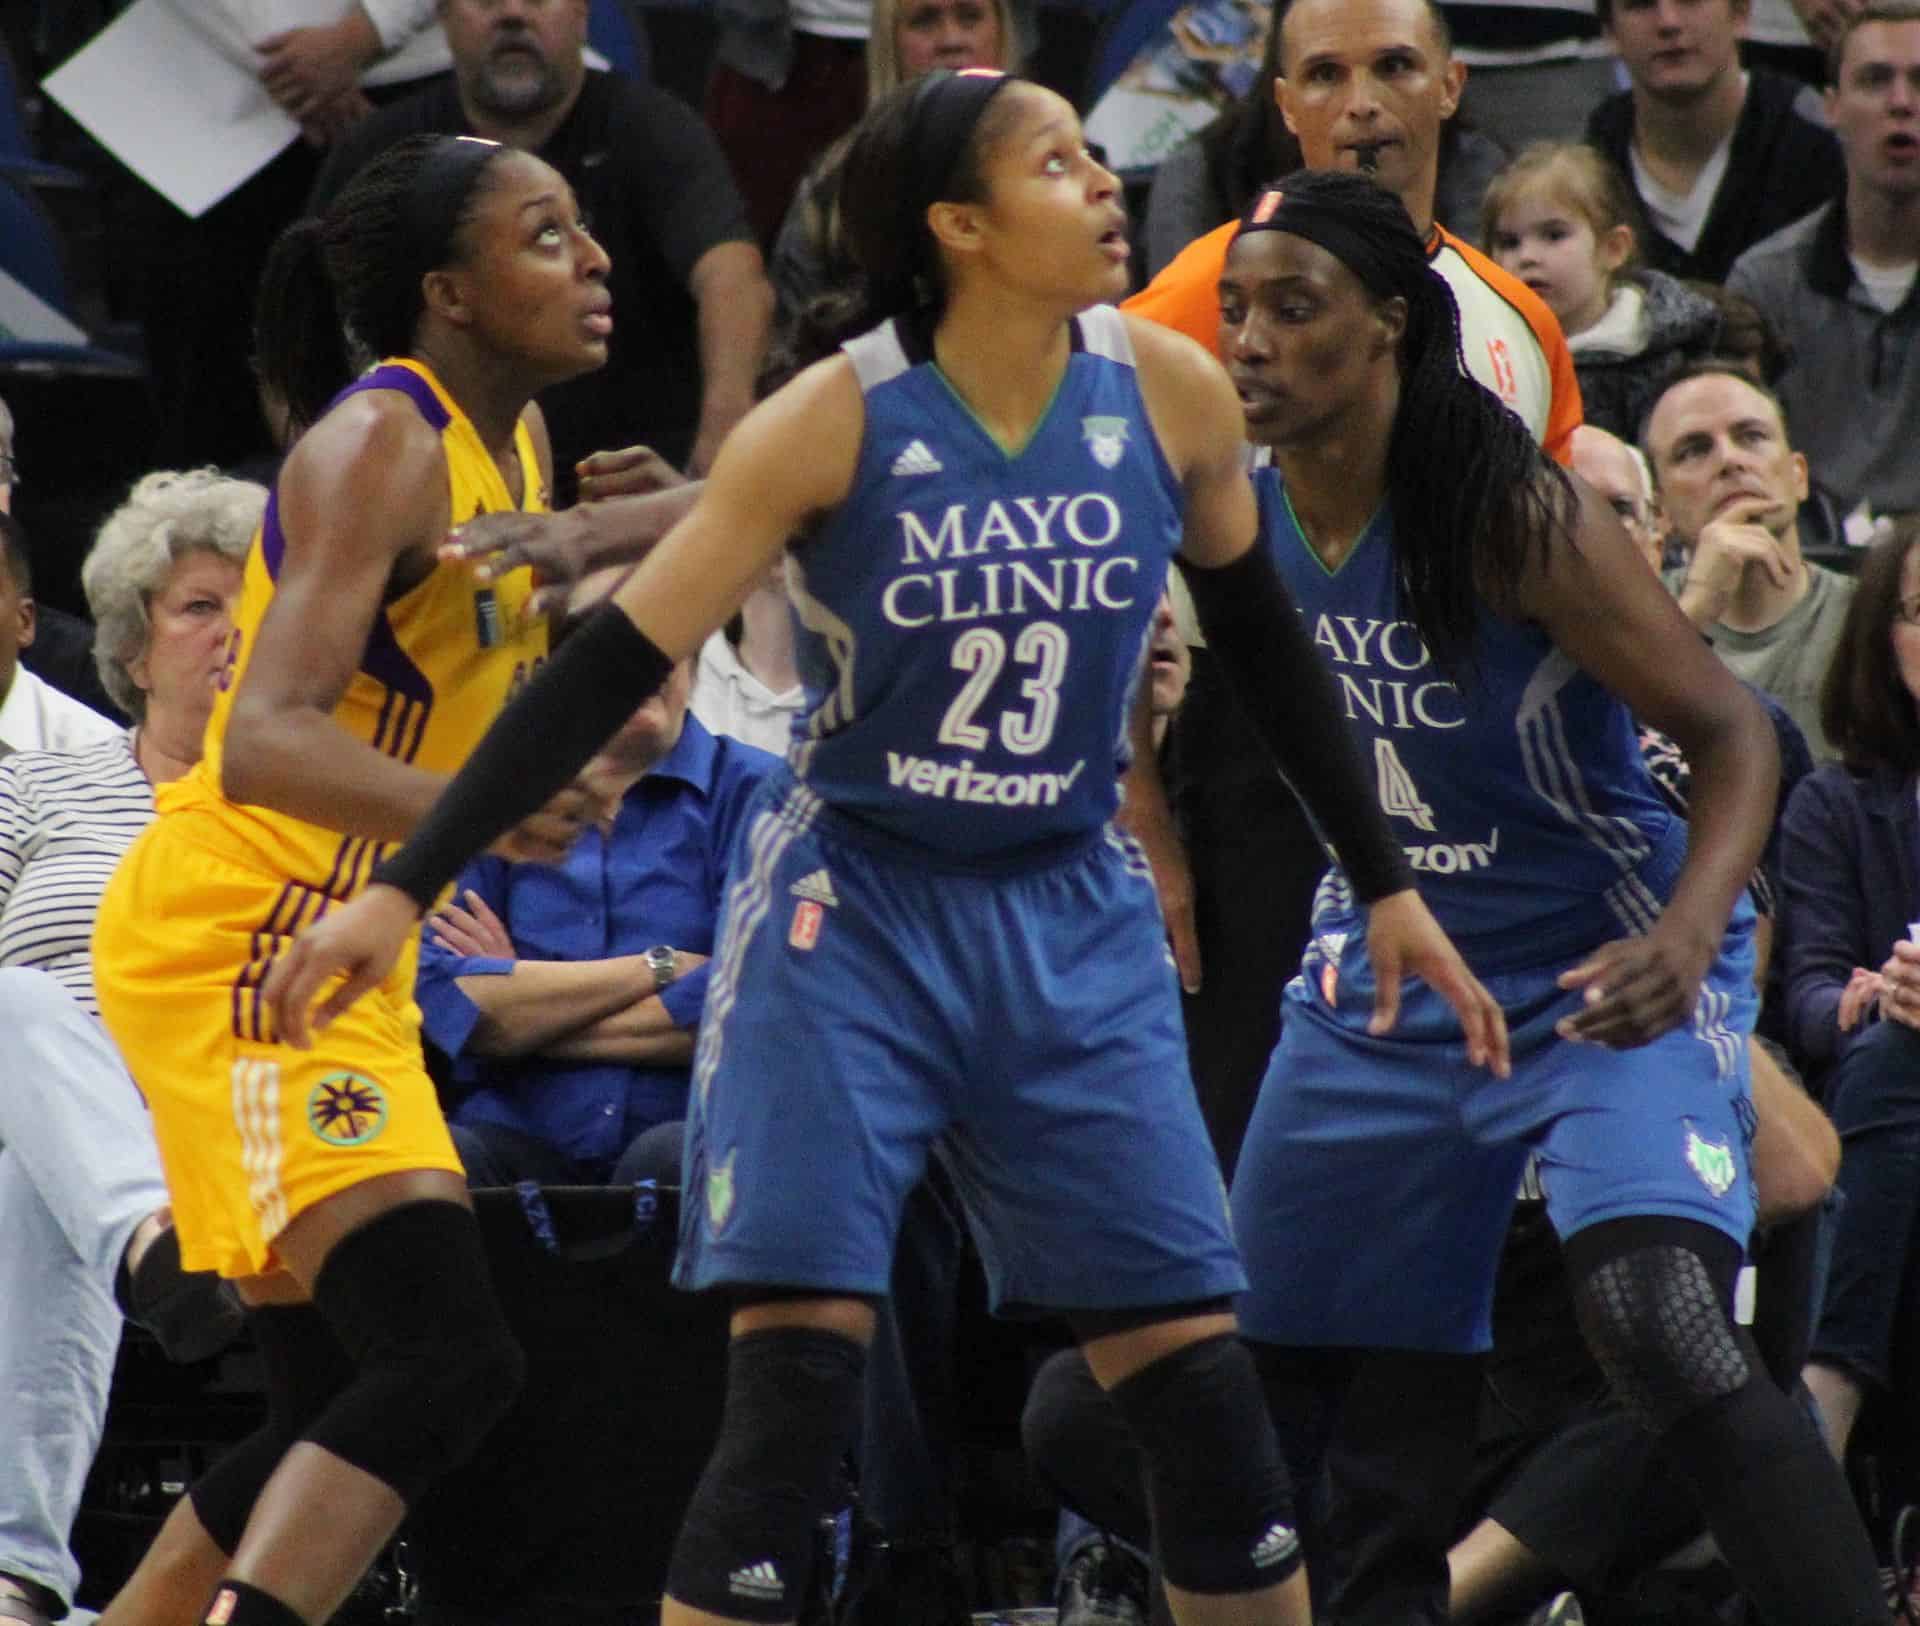 WNBA players want better working conditions, and they're not